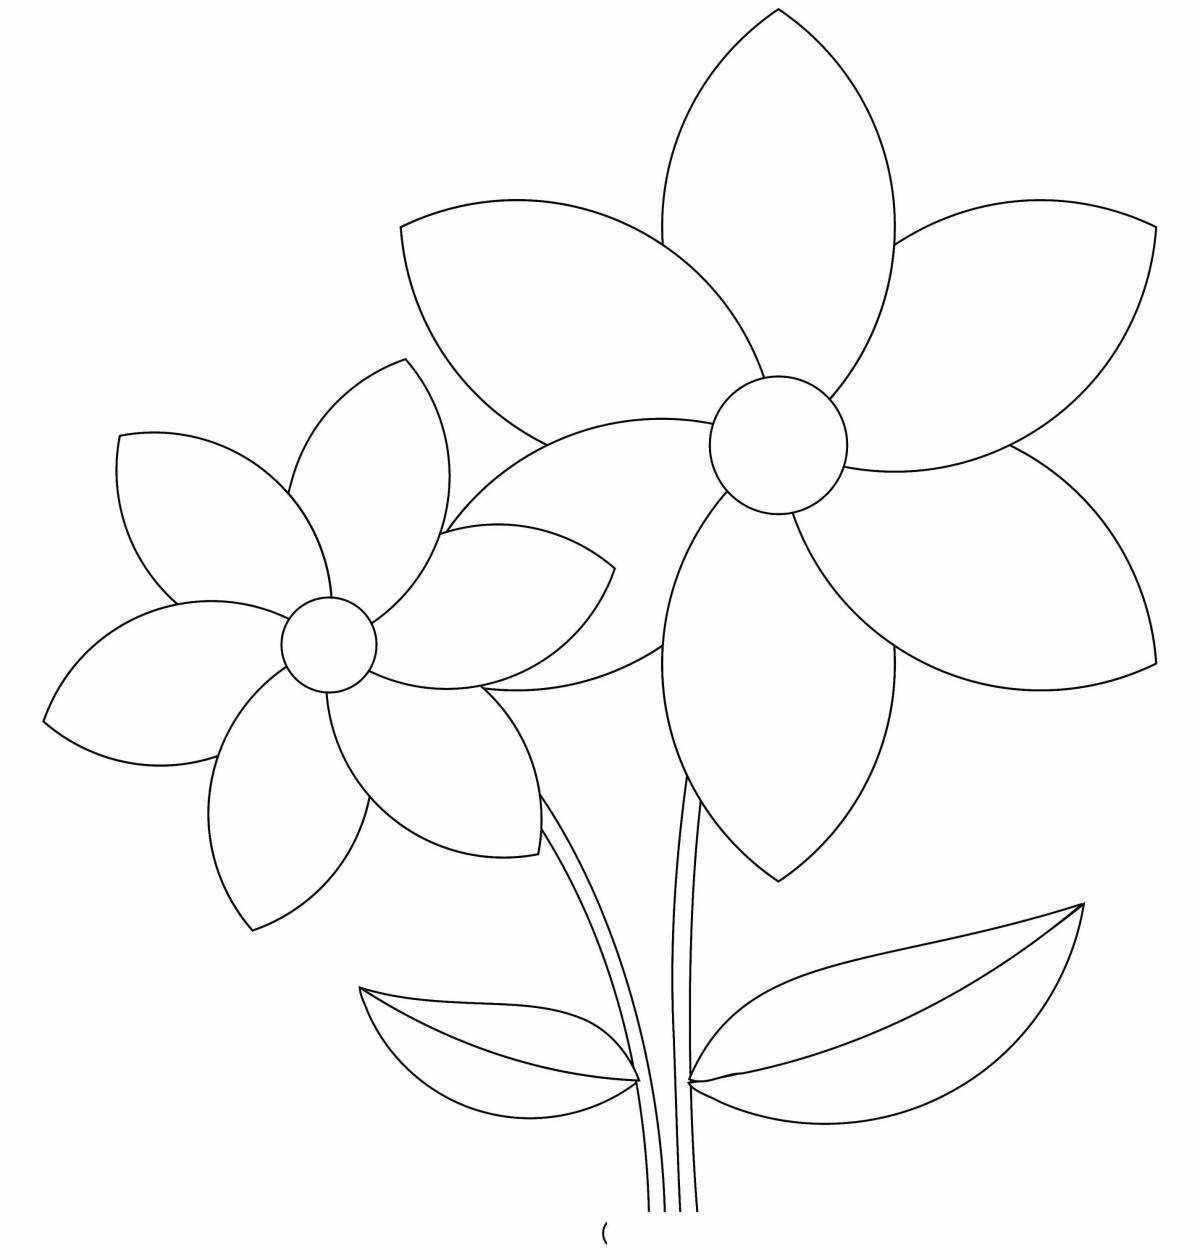 Coloring page serendipitous flower without stem